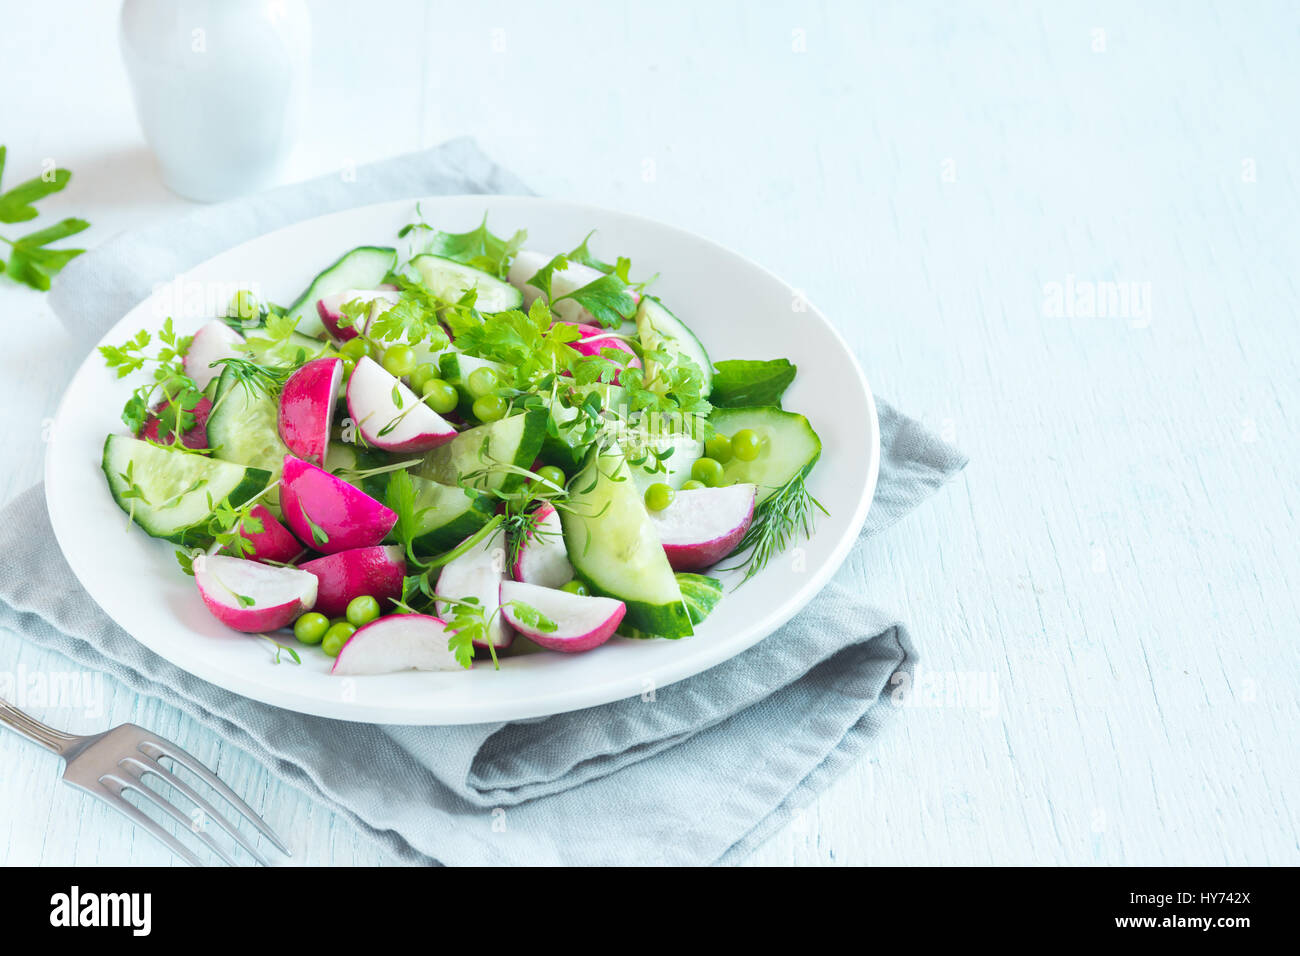 Healthy spring vegetables salad with radish, cucumber, green peas and sprouts, diet, vegetarian, vegan, organic, green food, spring detox snack. Stock Photo